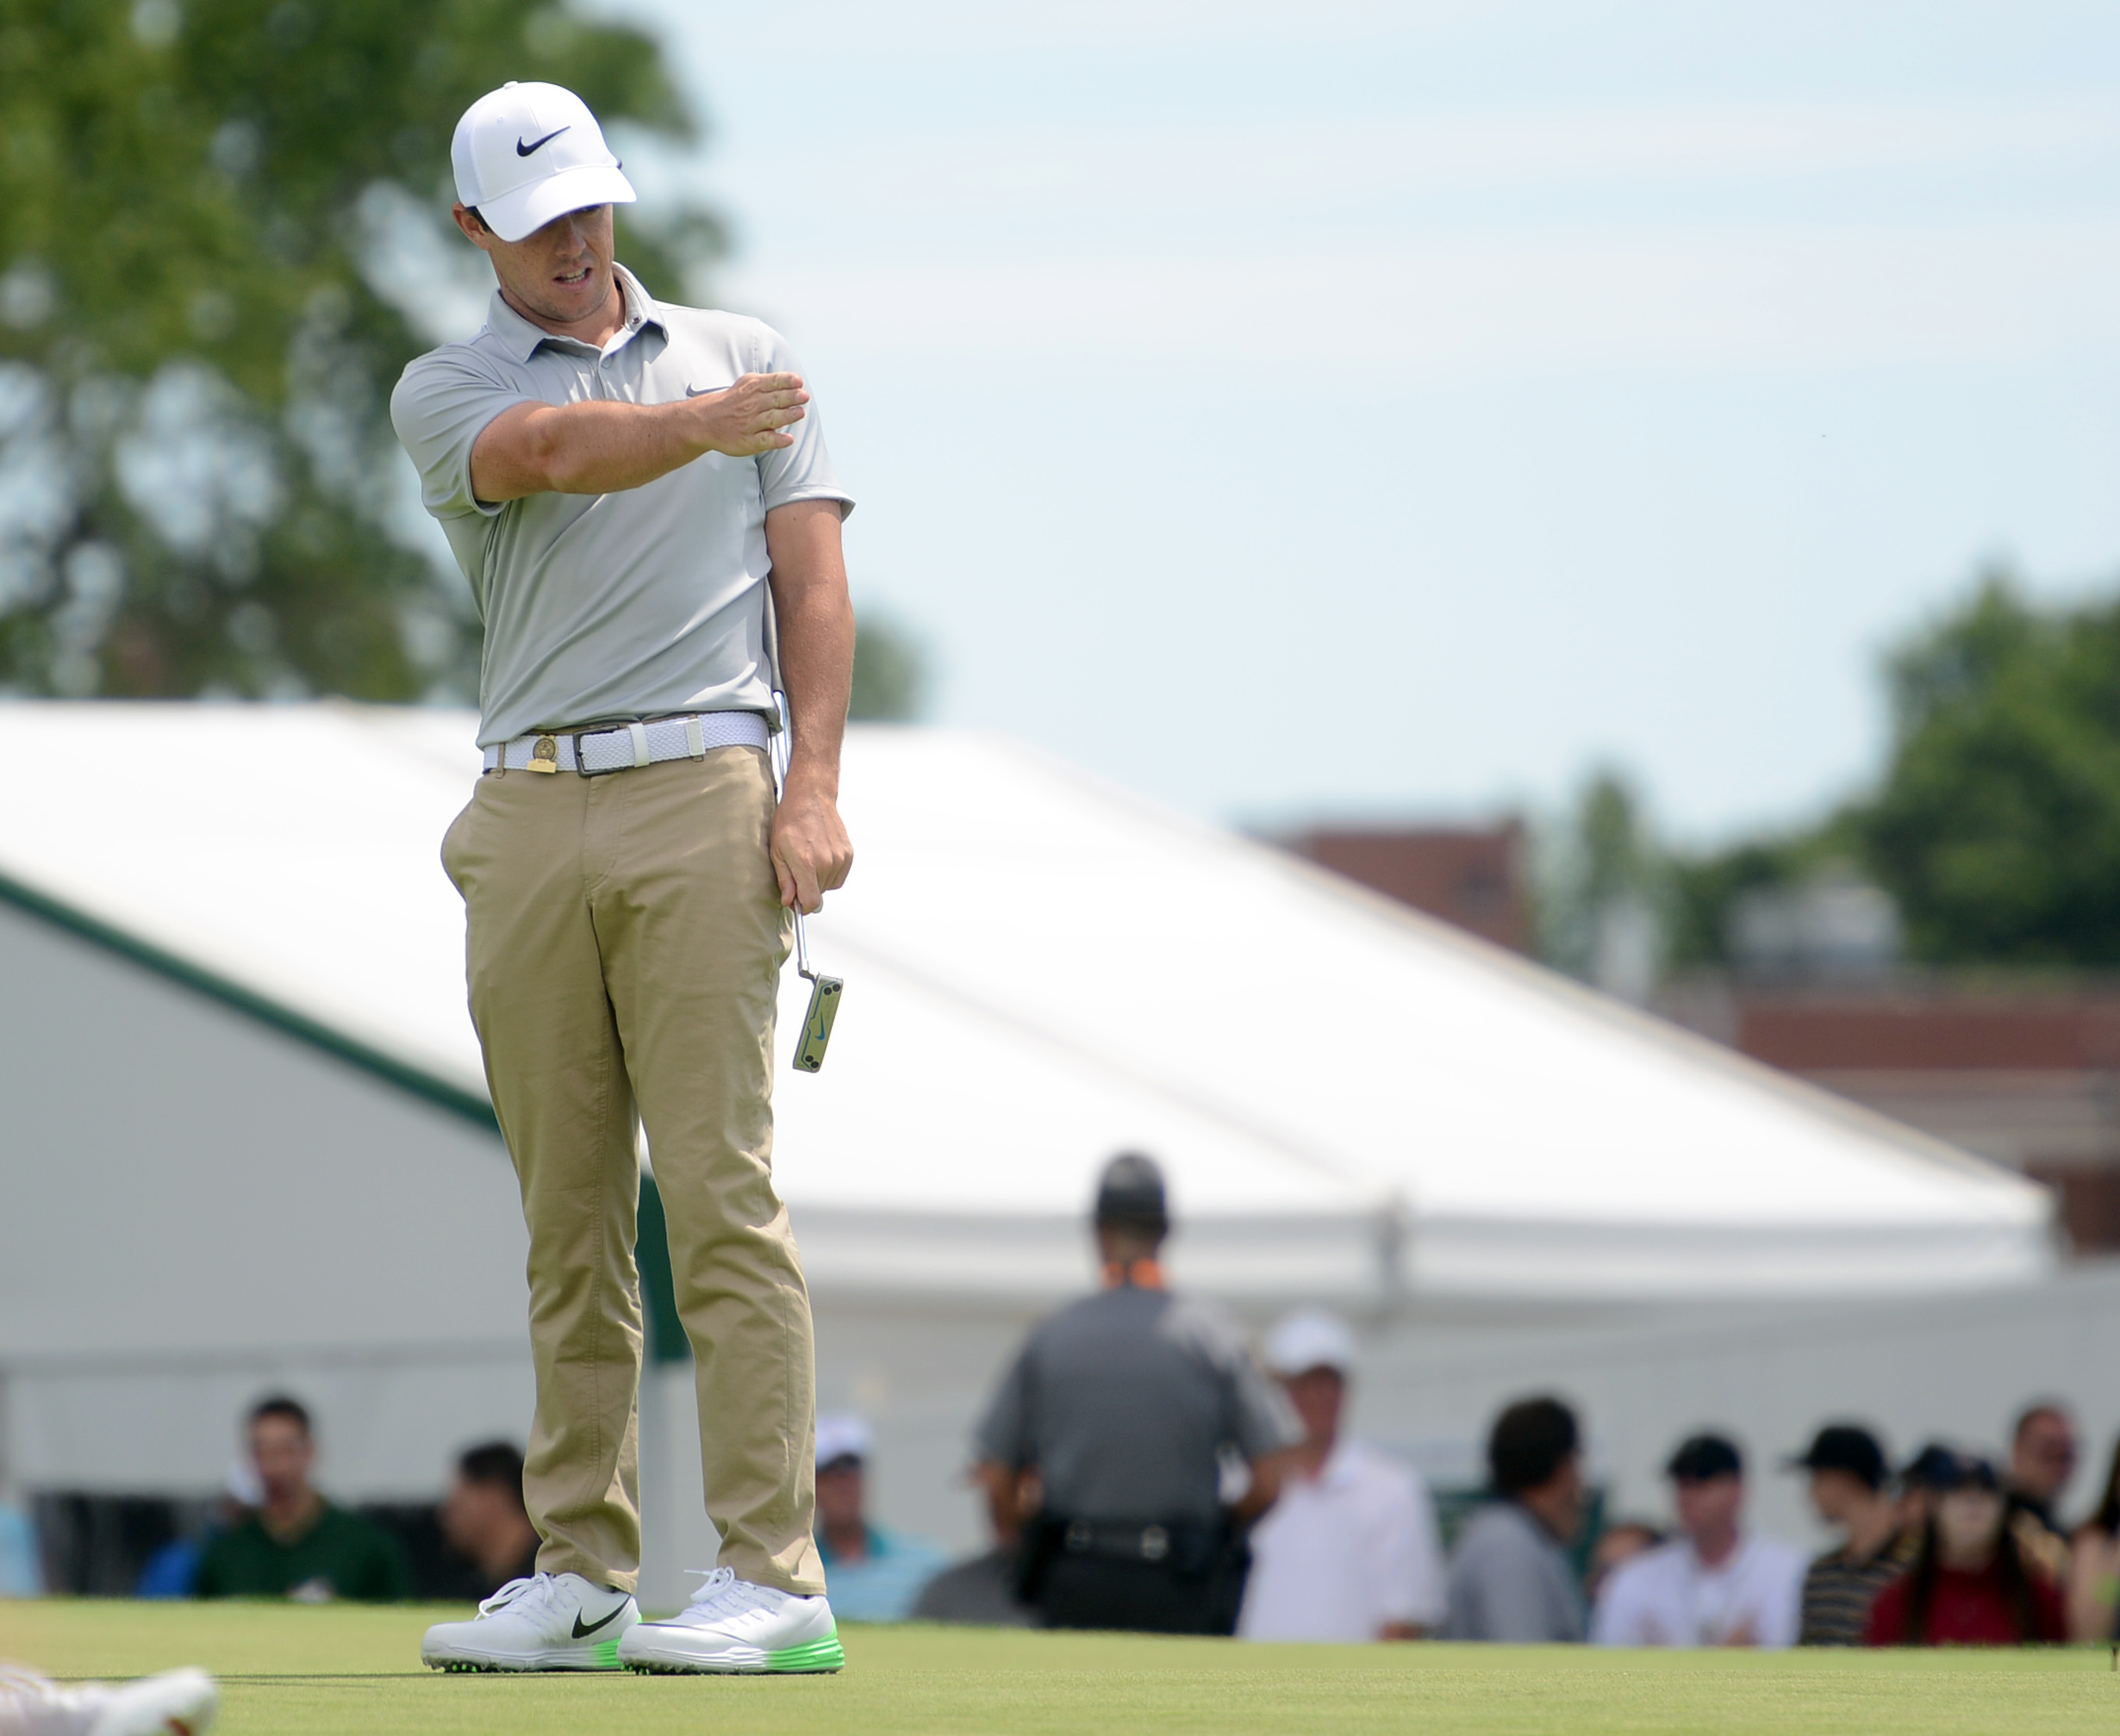 “I think the great thing about this golf course is it does give you options,” Rory McIlroy said. (Steve Mellon/Post-Gazette)